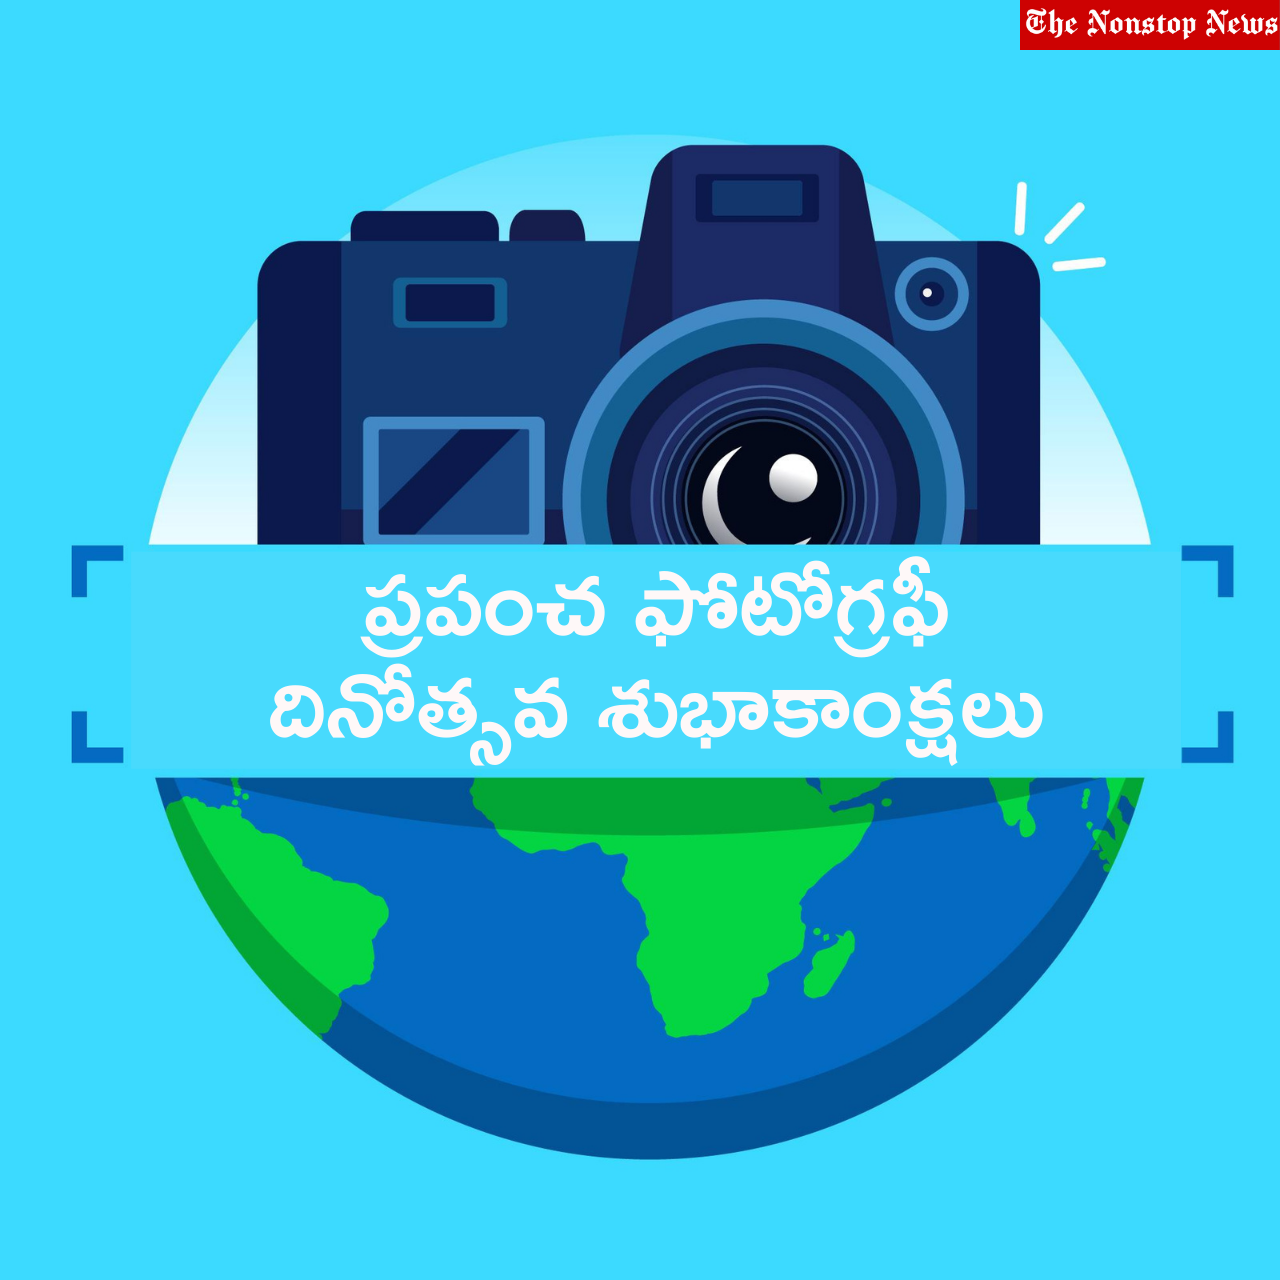 World Photography Day 2021 Telugu Quotes, Messages, Greetings, Shayari, Wishes, and HD Images for Photographers